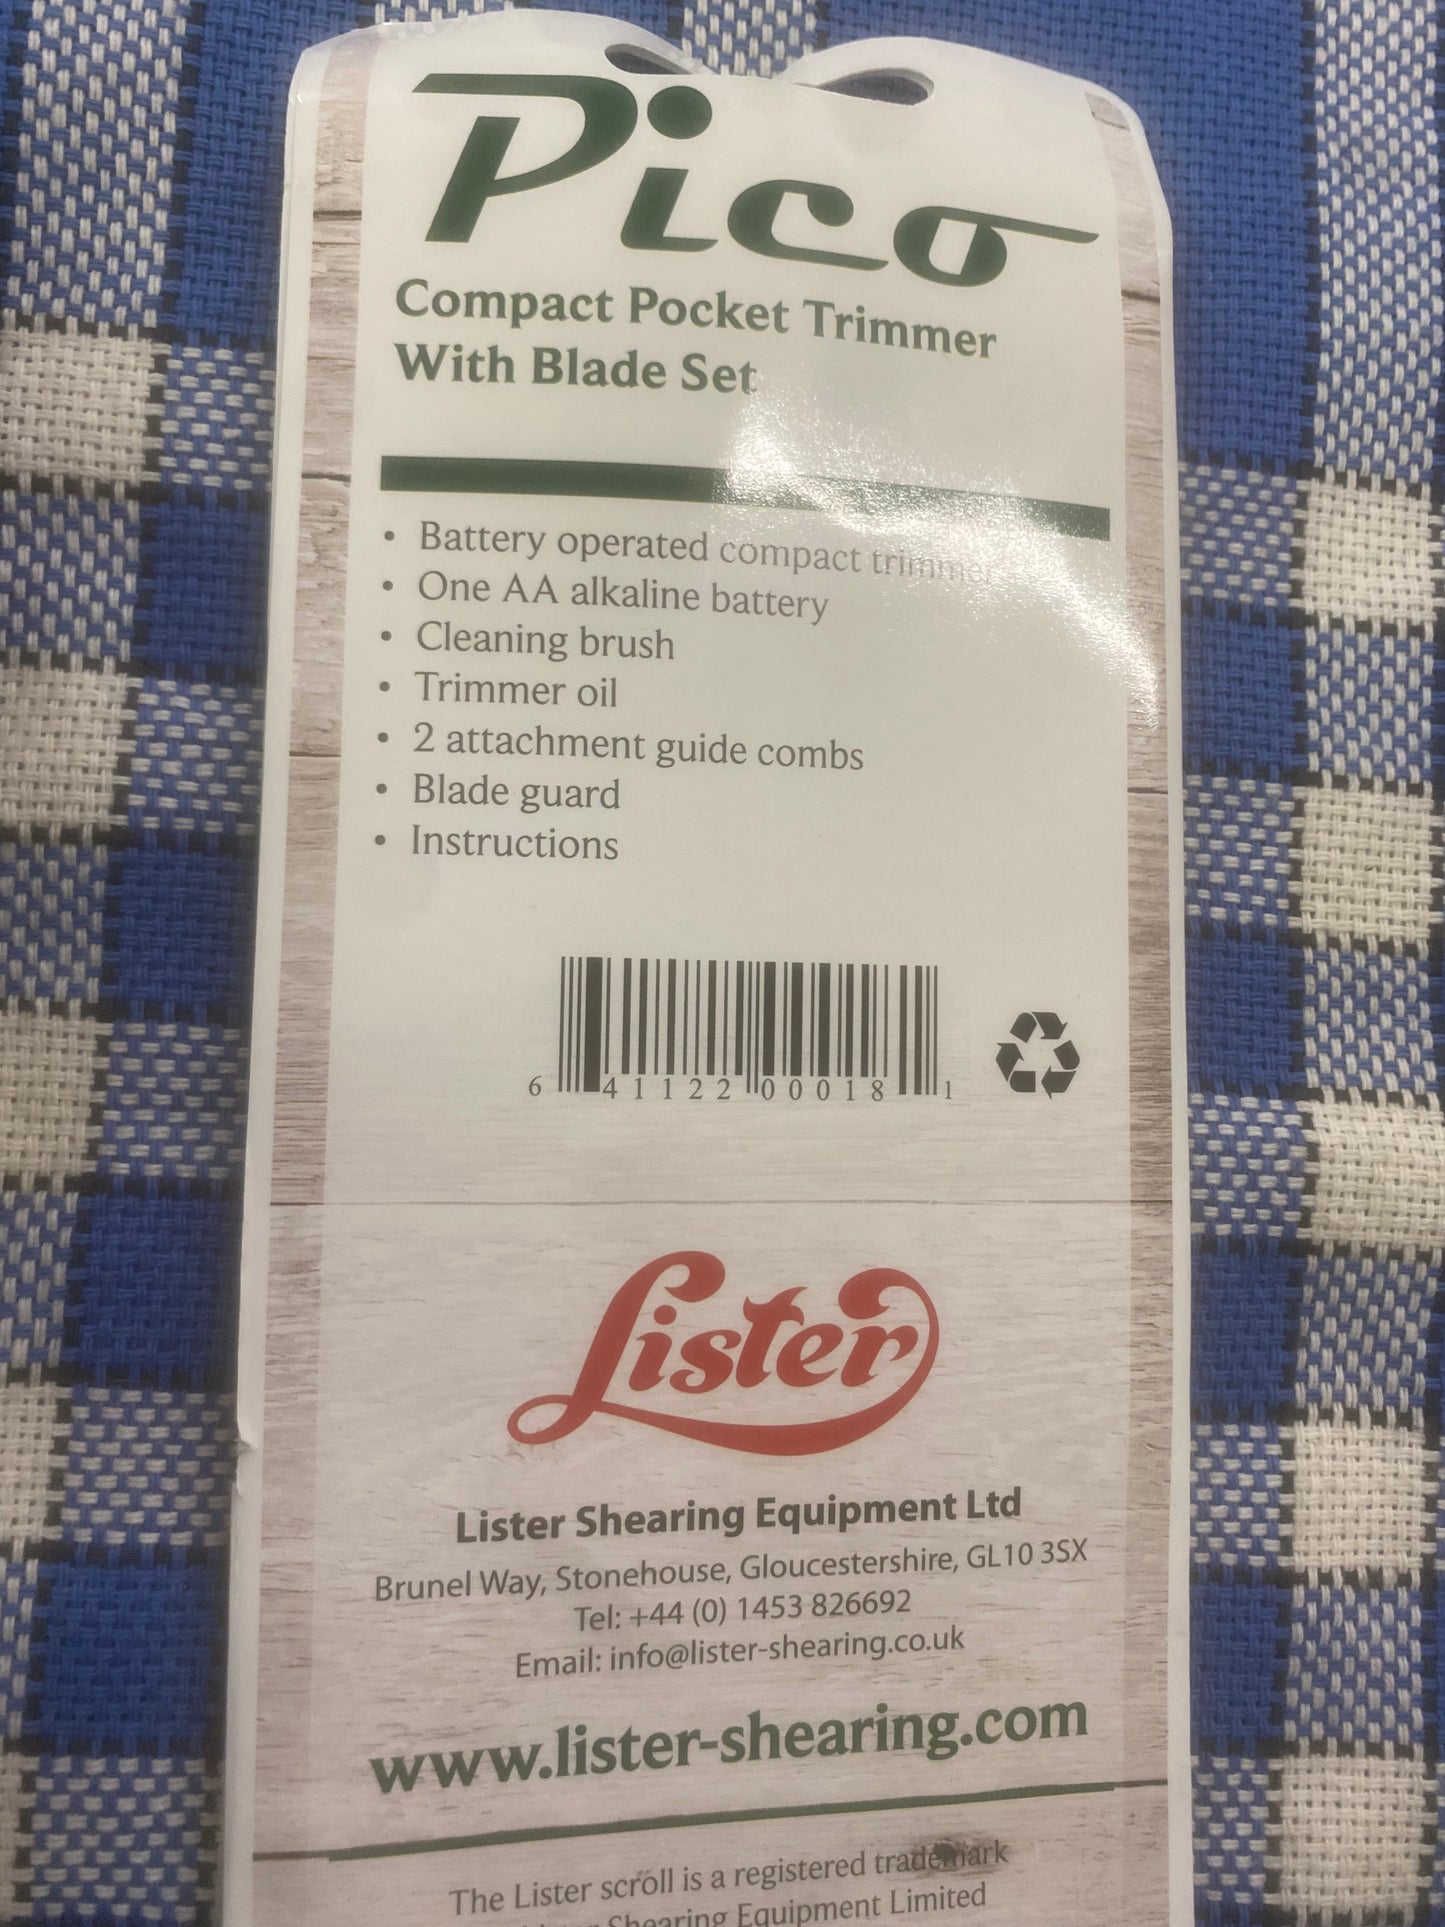 New lister pico compact pocket trimmer with blades FREE POSTAGE🟢